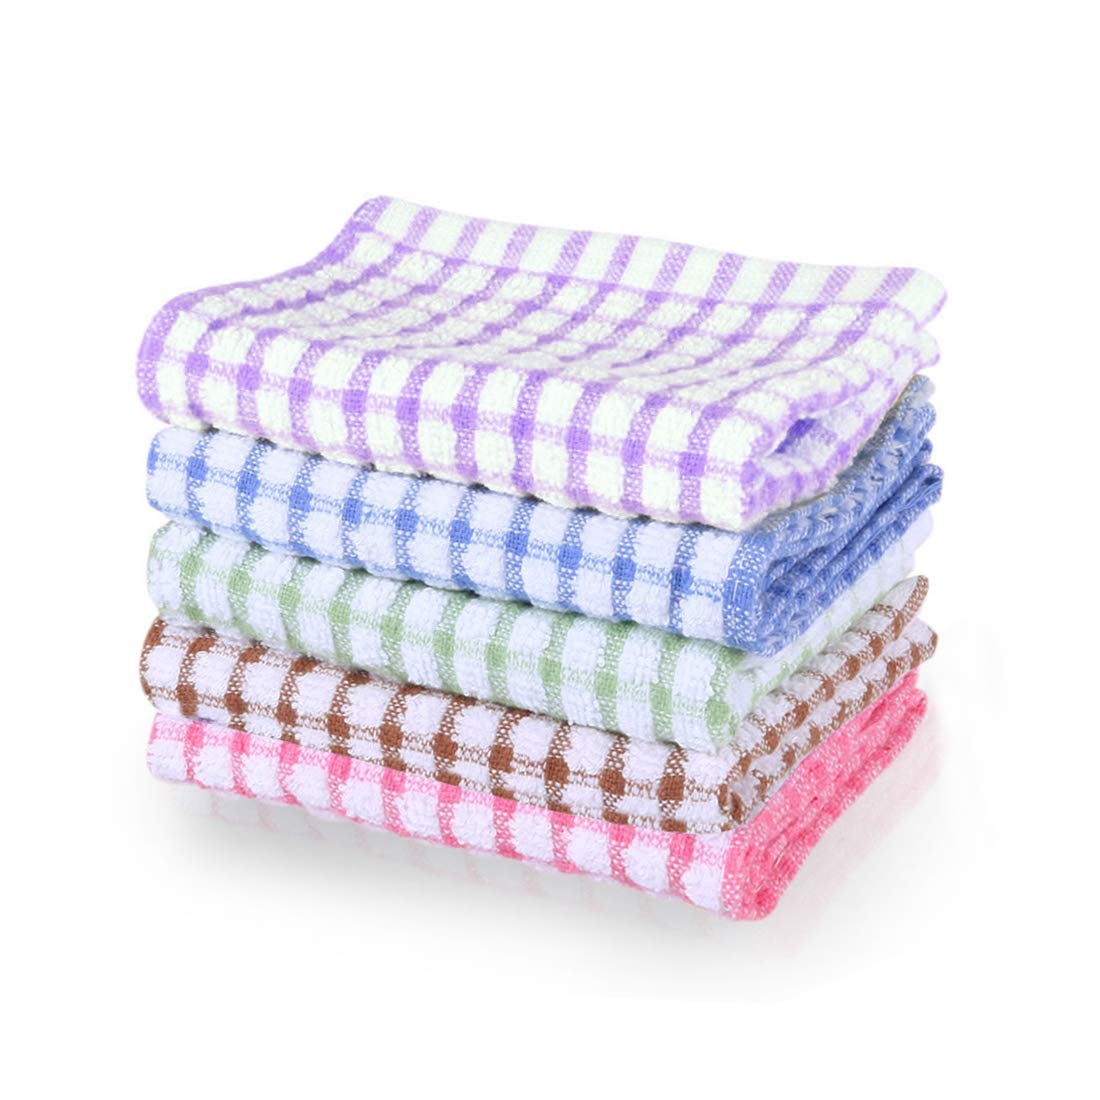 uxcell Cotton Terry Kitchen Towels Dish Cloth, Cleaning Drying Hotel Wash Cloth, 15 x 10.5 inches, pack of 6, Assorted Color